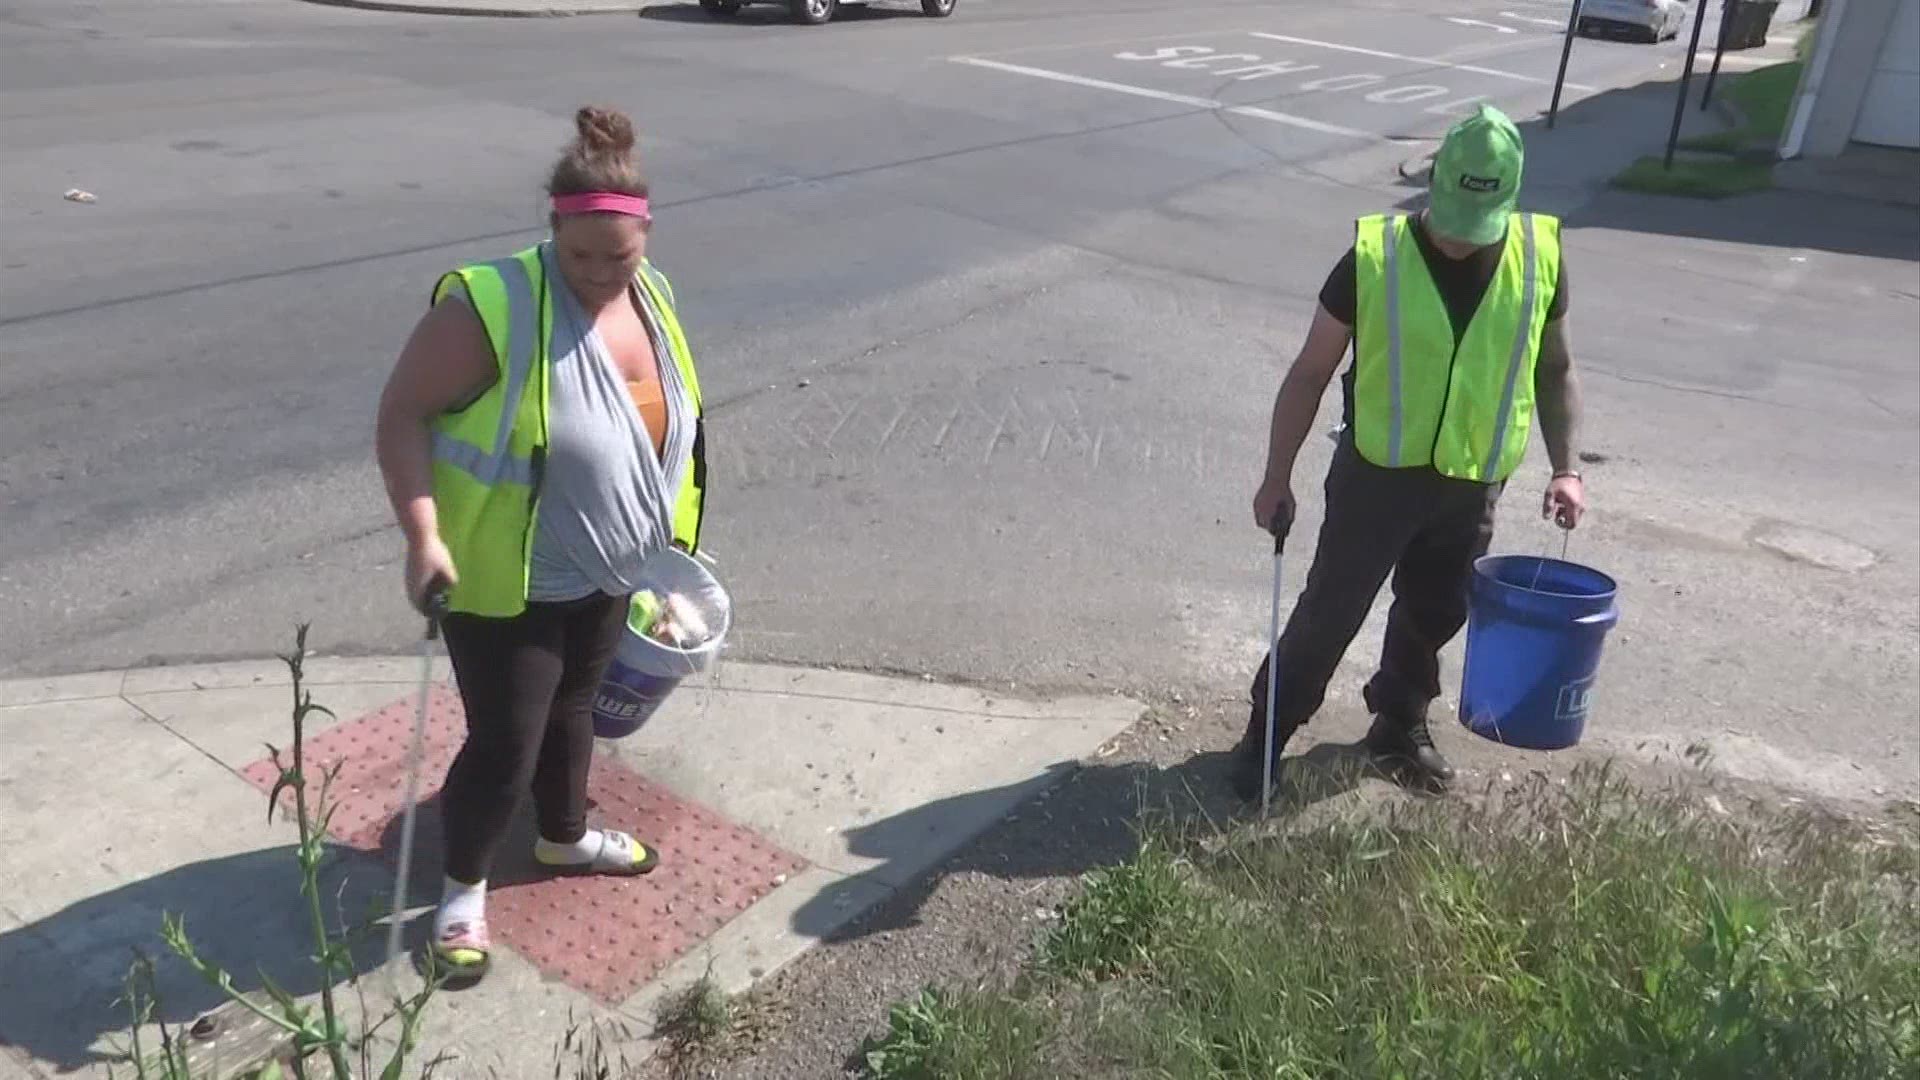 Local residents get paid to help clean up neighborhoods.